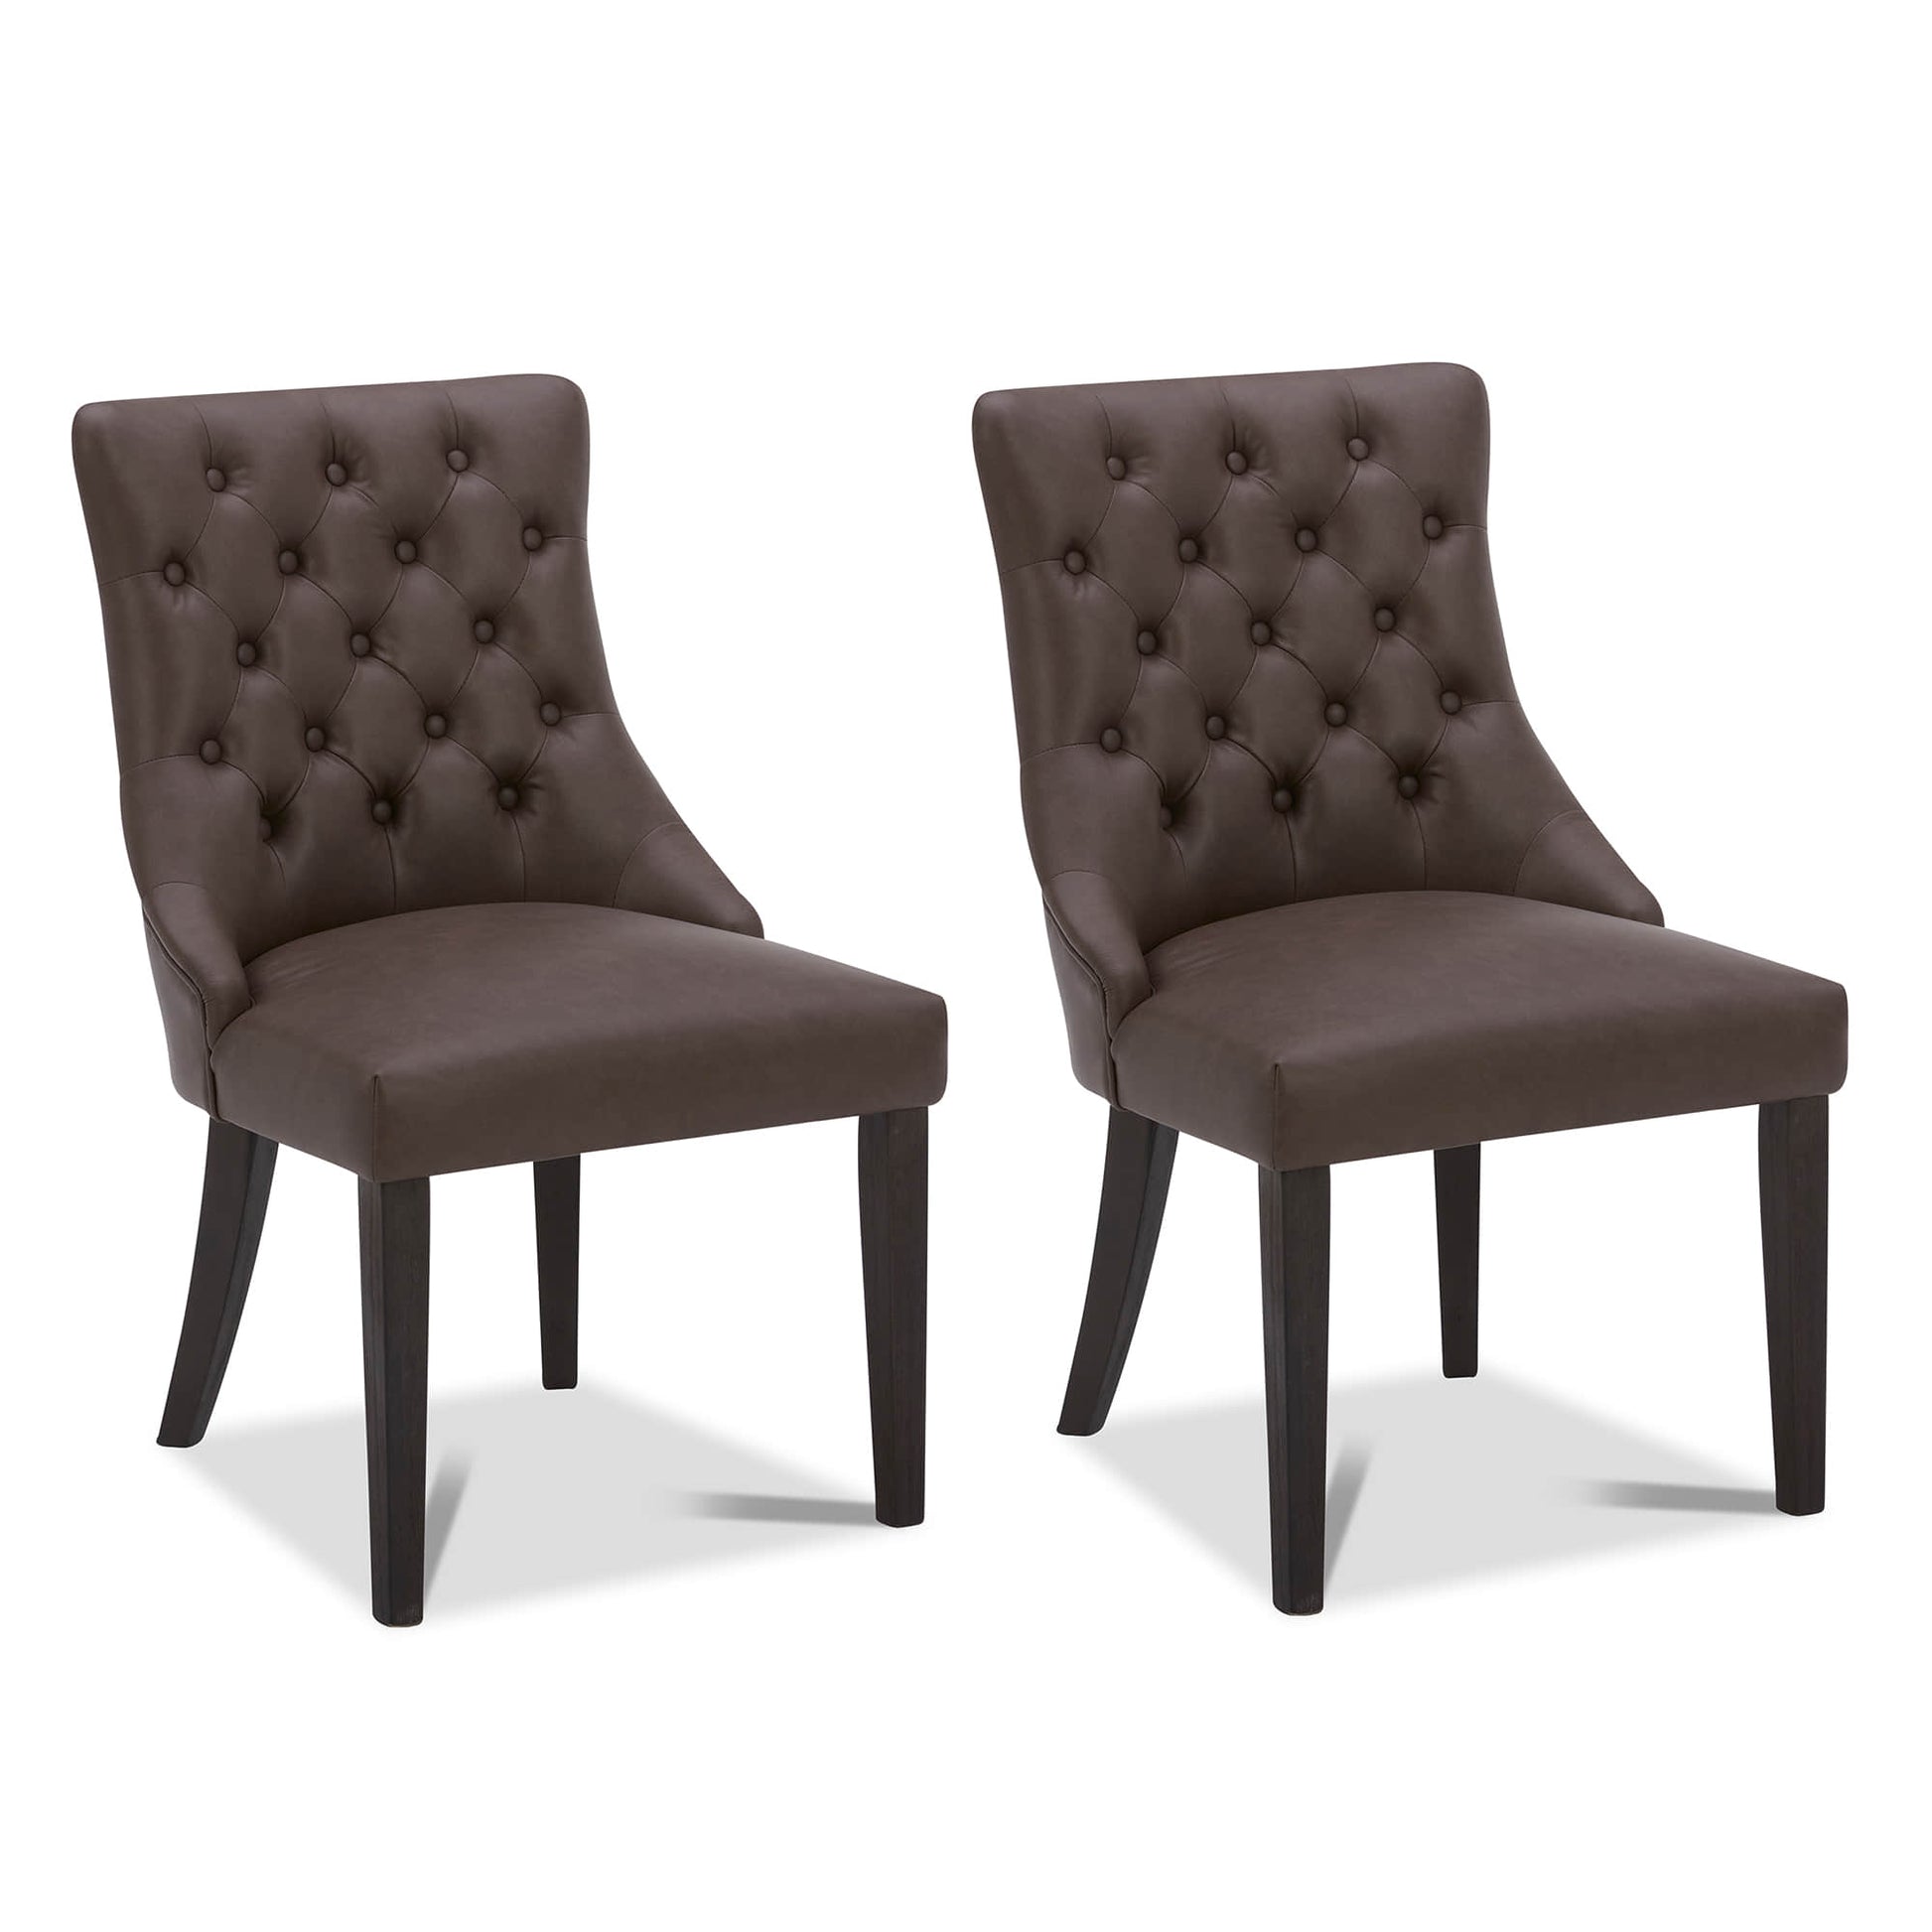 CHITA LIVING-Morgan Prime Tufted Dining Chair (Set of 2)-Dining Chairs-Faux Leather-Chocolate-